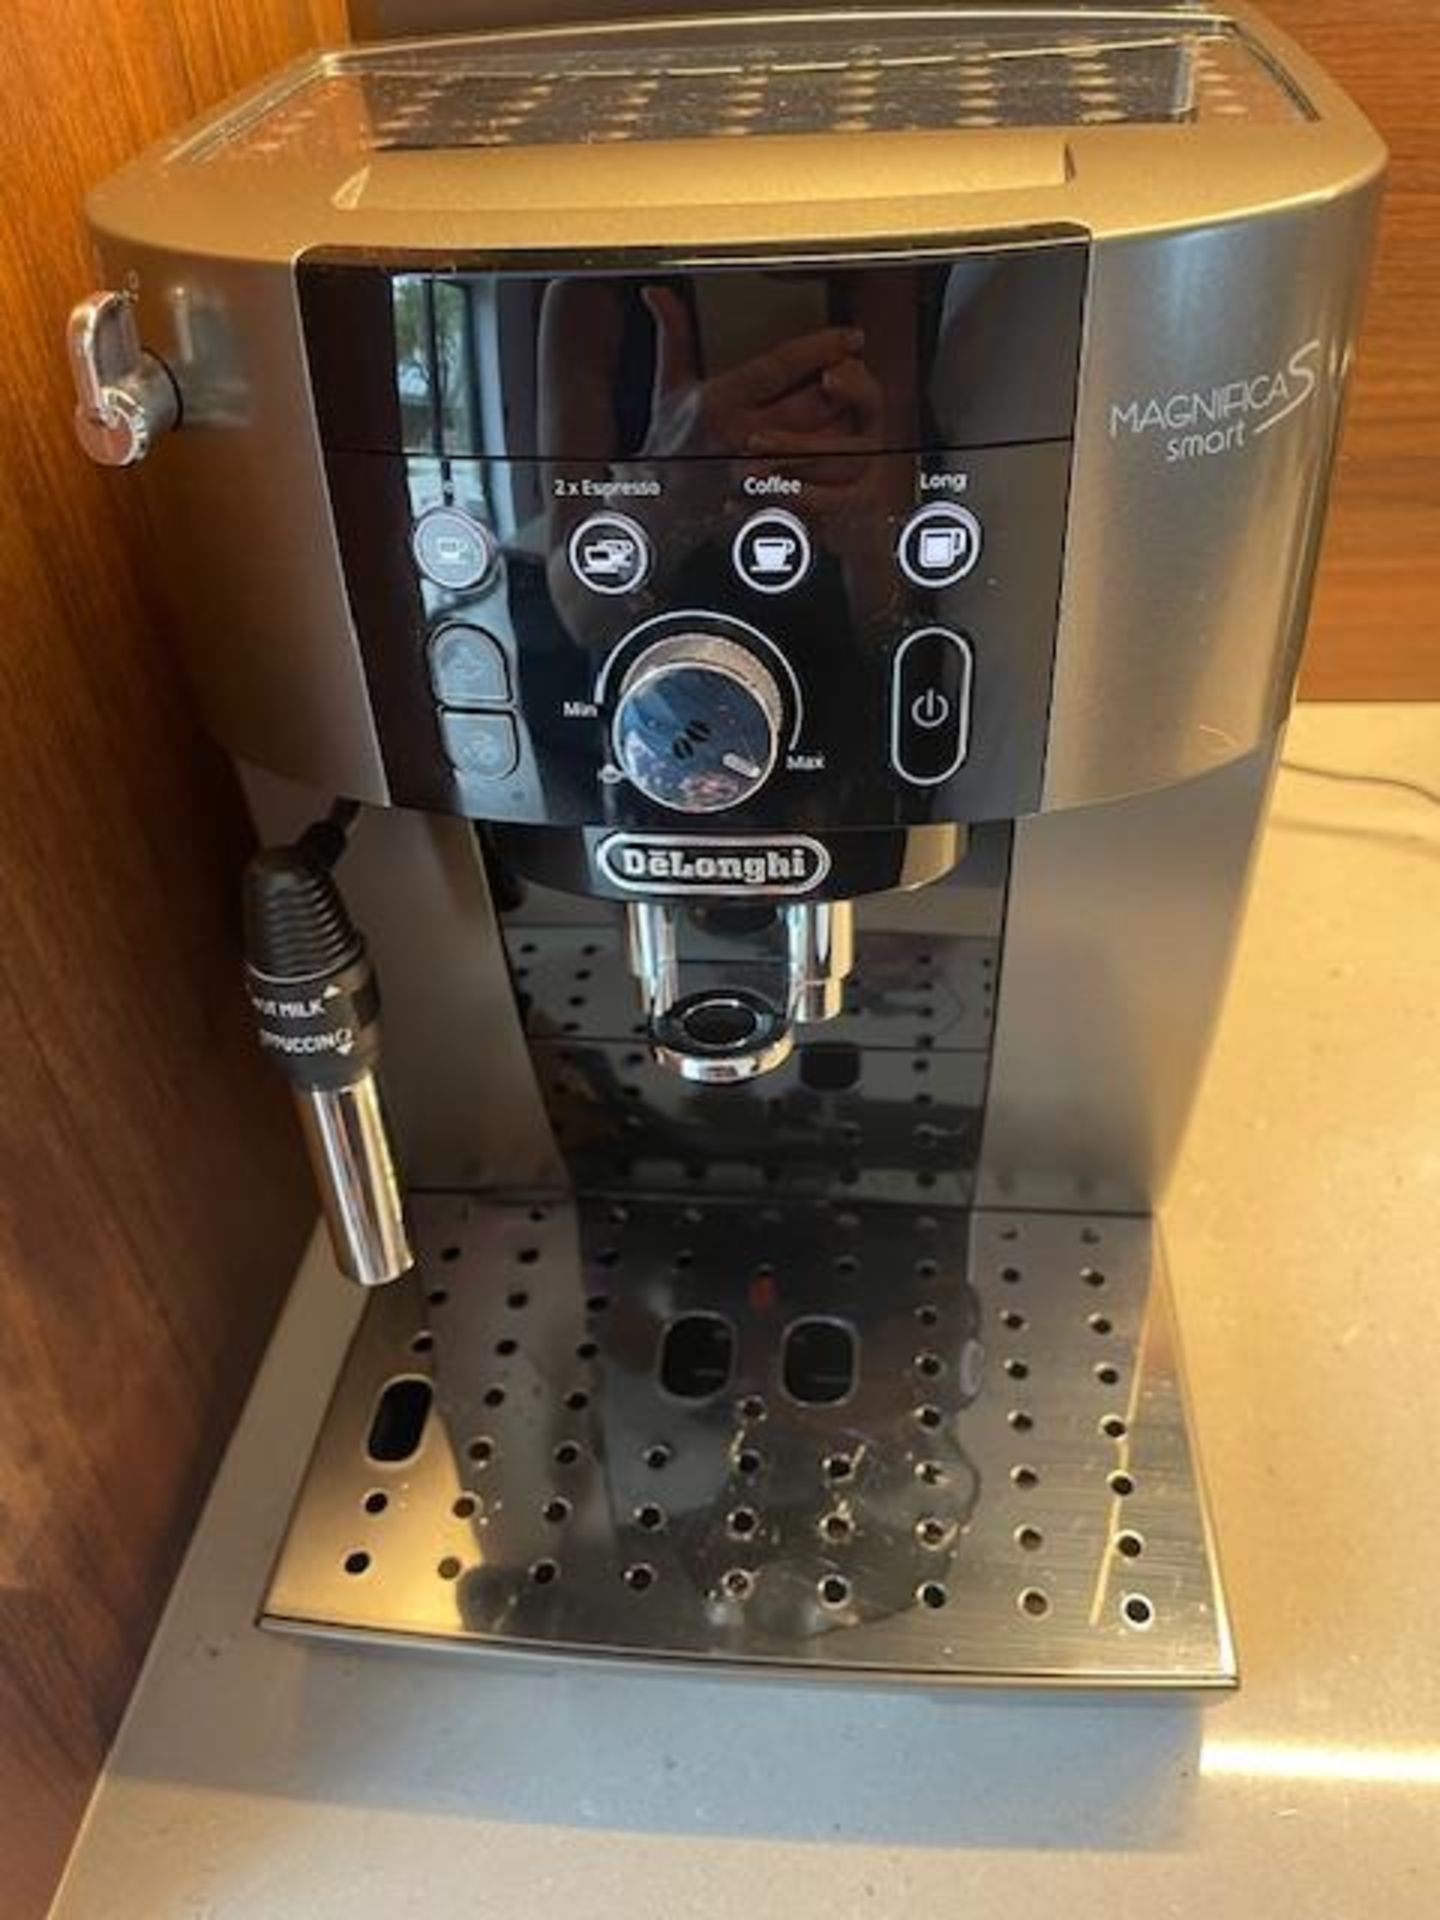 DELONGHI MAGNIFCA S SMART BEAN TO CUP COFFEE MACHINE. - Image 2 of 6